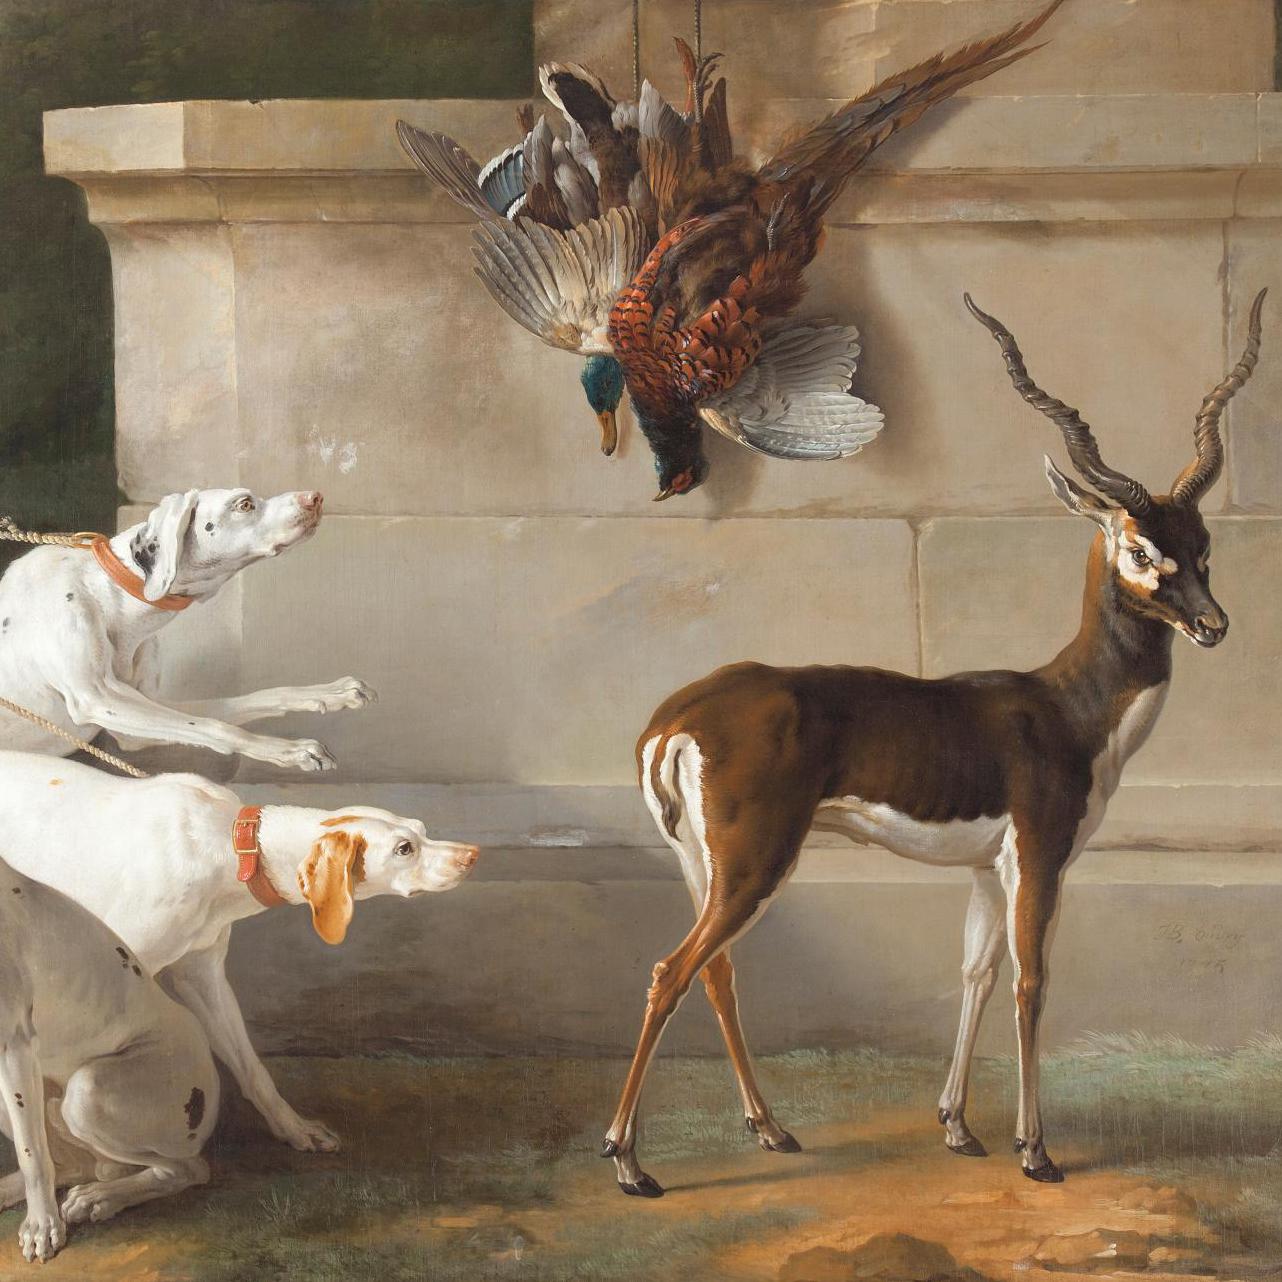 Royal Animals and Political Beasts During the Enlightenment